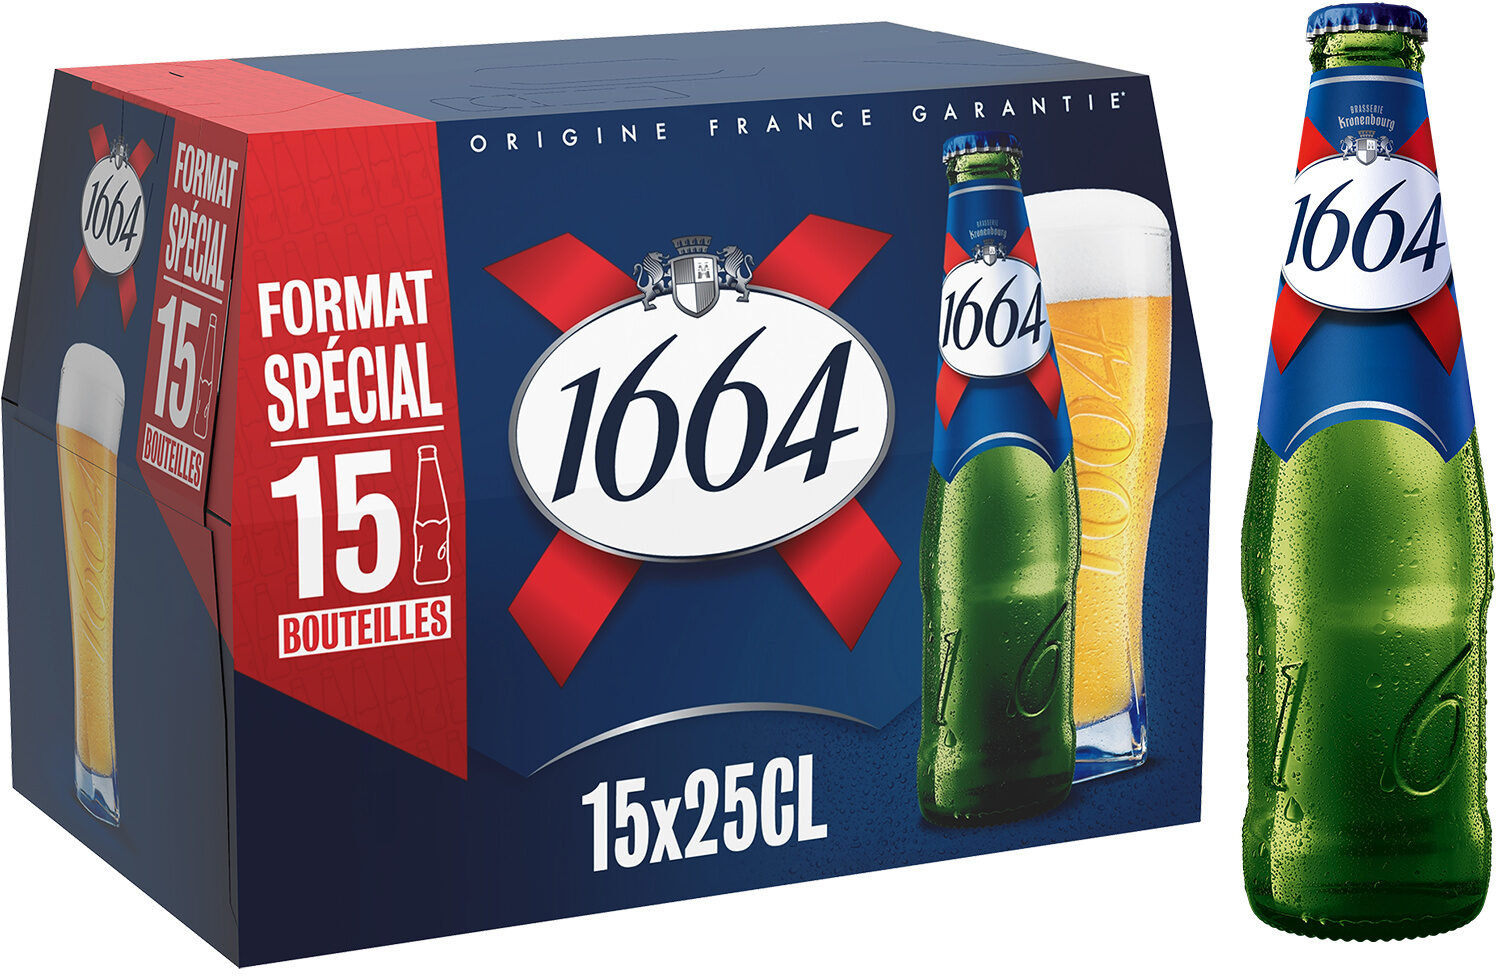 1664 15x25cl 1664 format special 5.5 degre alcool - Producto - fr